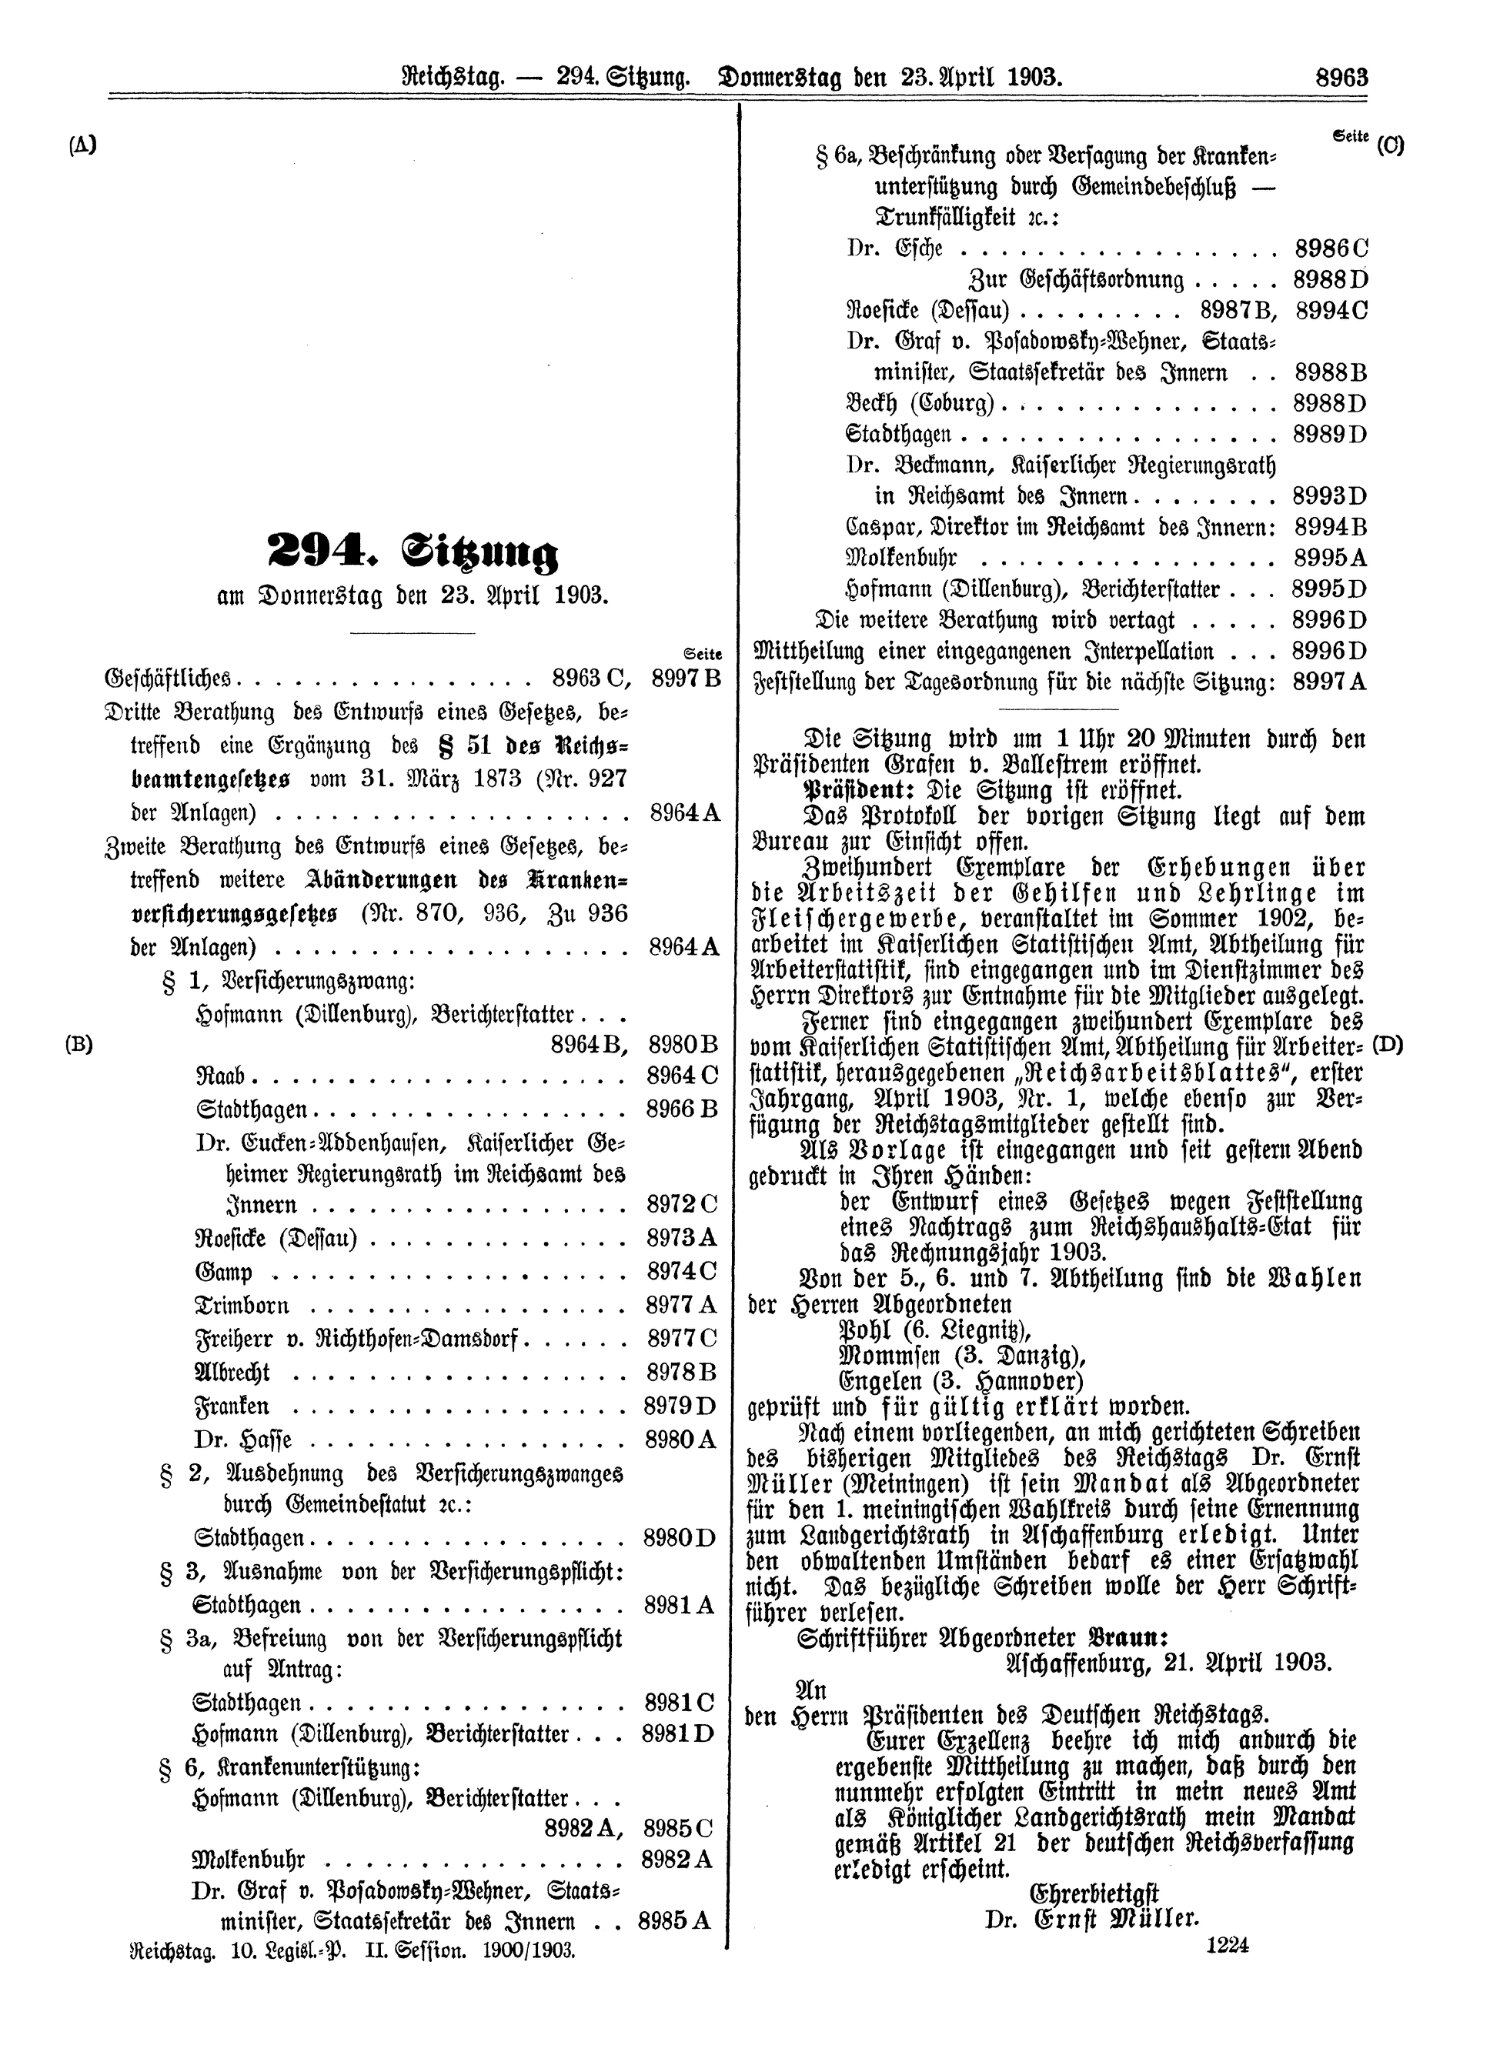 Scan of page 8963